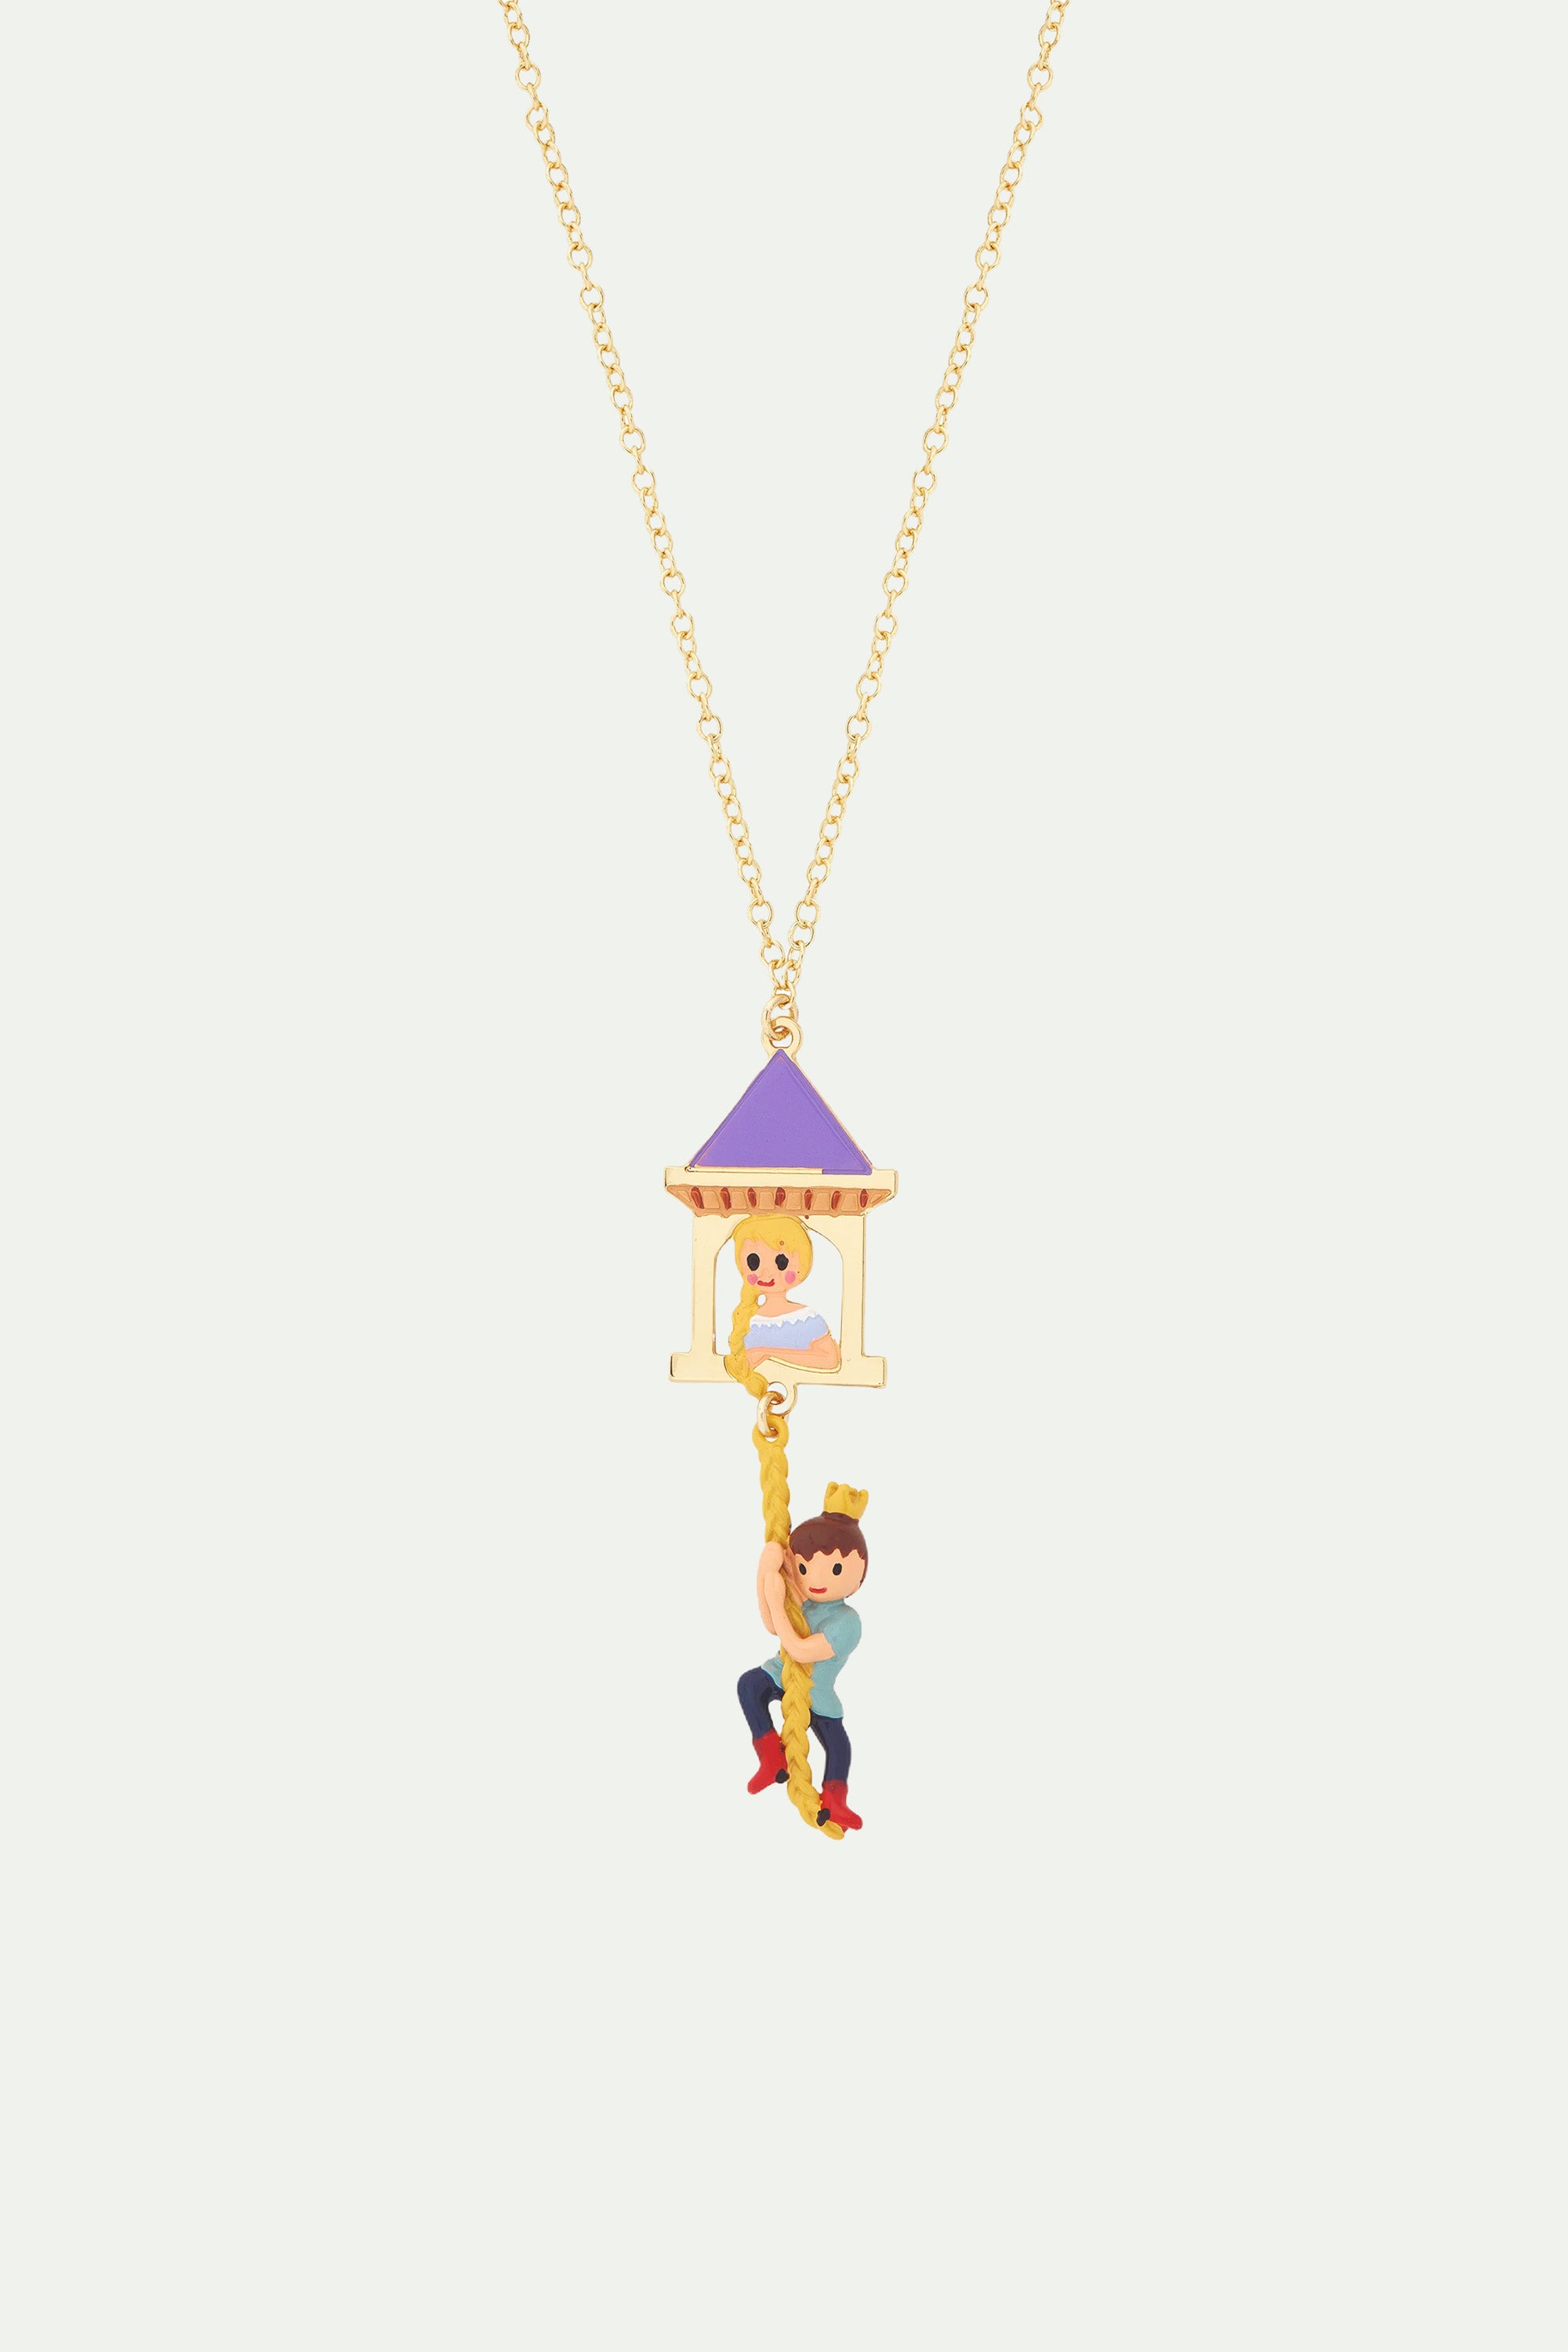 Enchanted hair princess and prince pendant necklace